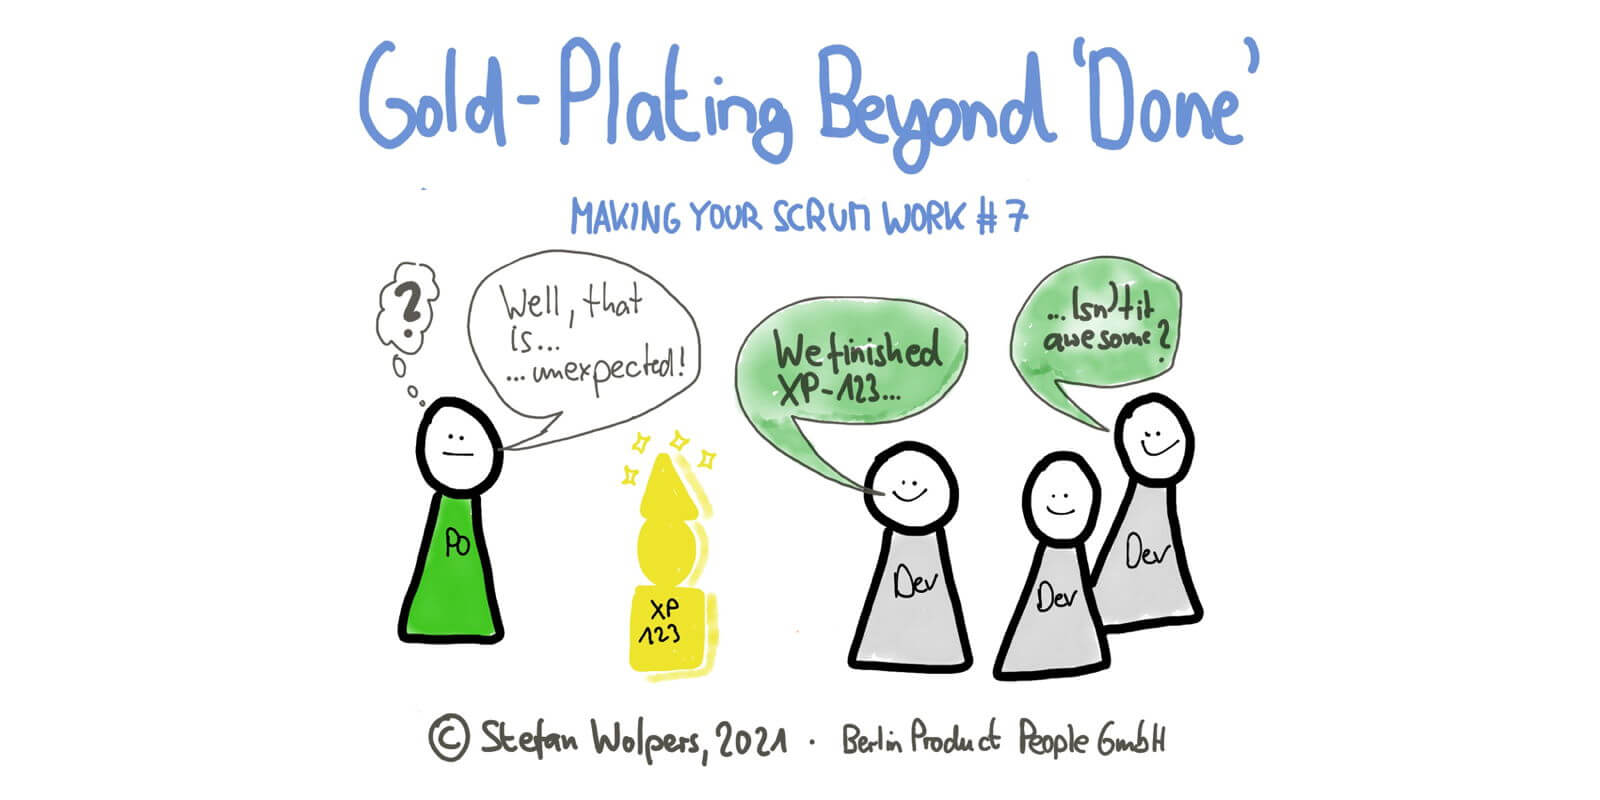 Gold-Plating Beyond Done — Making Your Scrum Work #7 — Berlin Product People GmbH